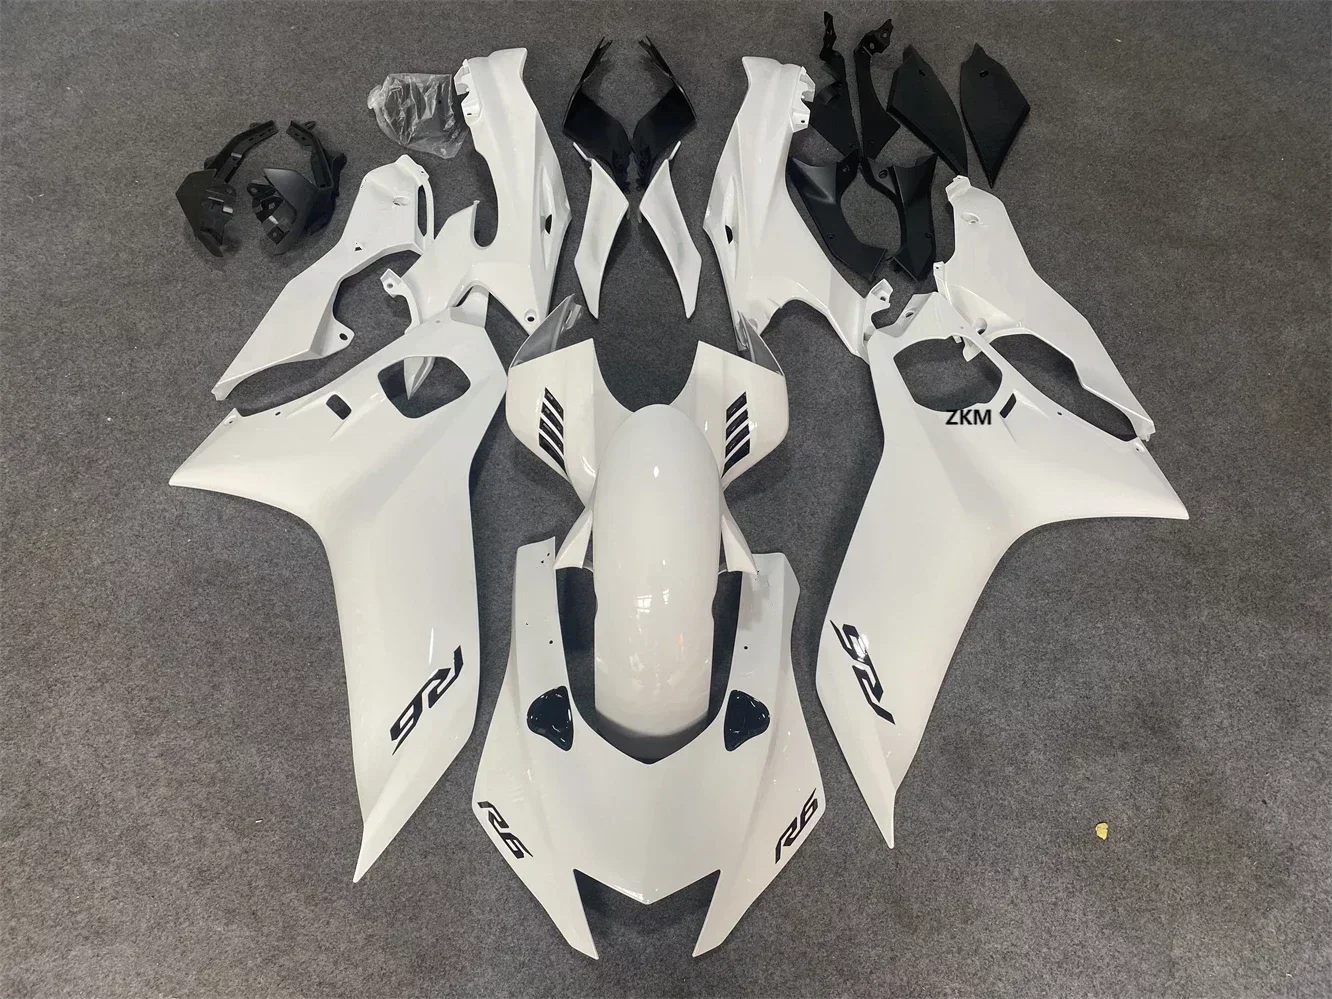 

New ABS Whole Motorcycle Fairing Kit Fit Bodywork For YAMAHA YZF R6 2017 2018 2019 2020 17 18 19 20 Brilliantly white